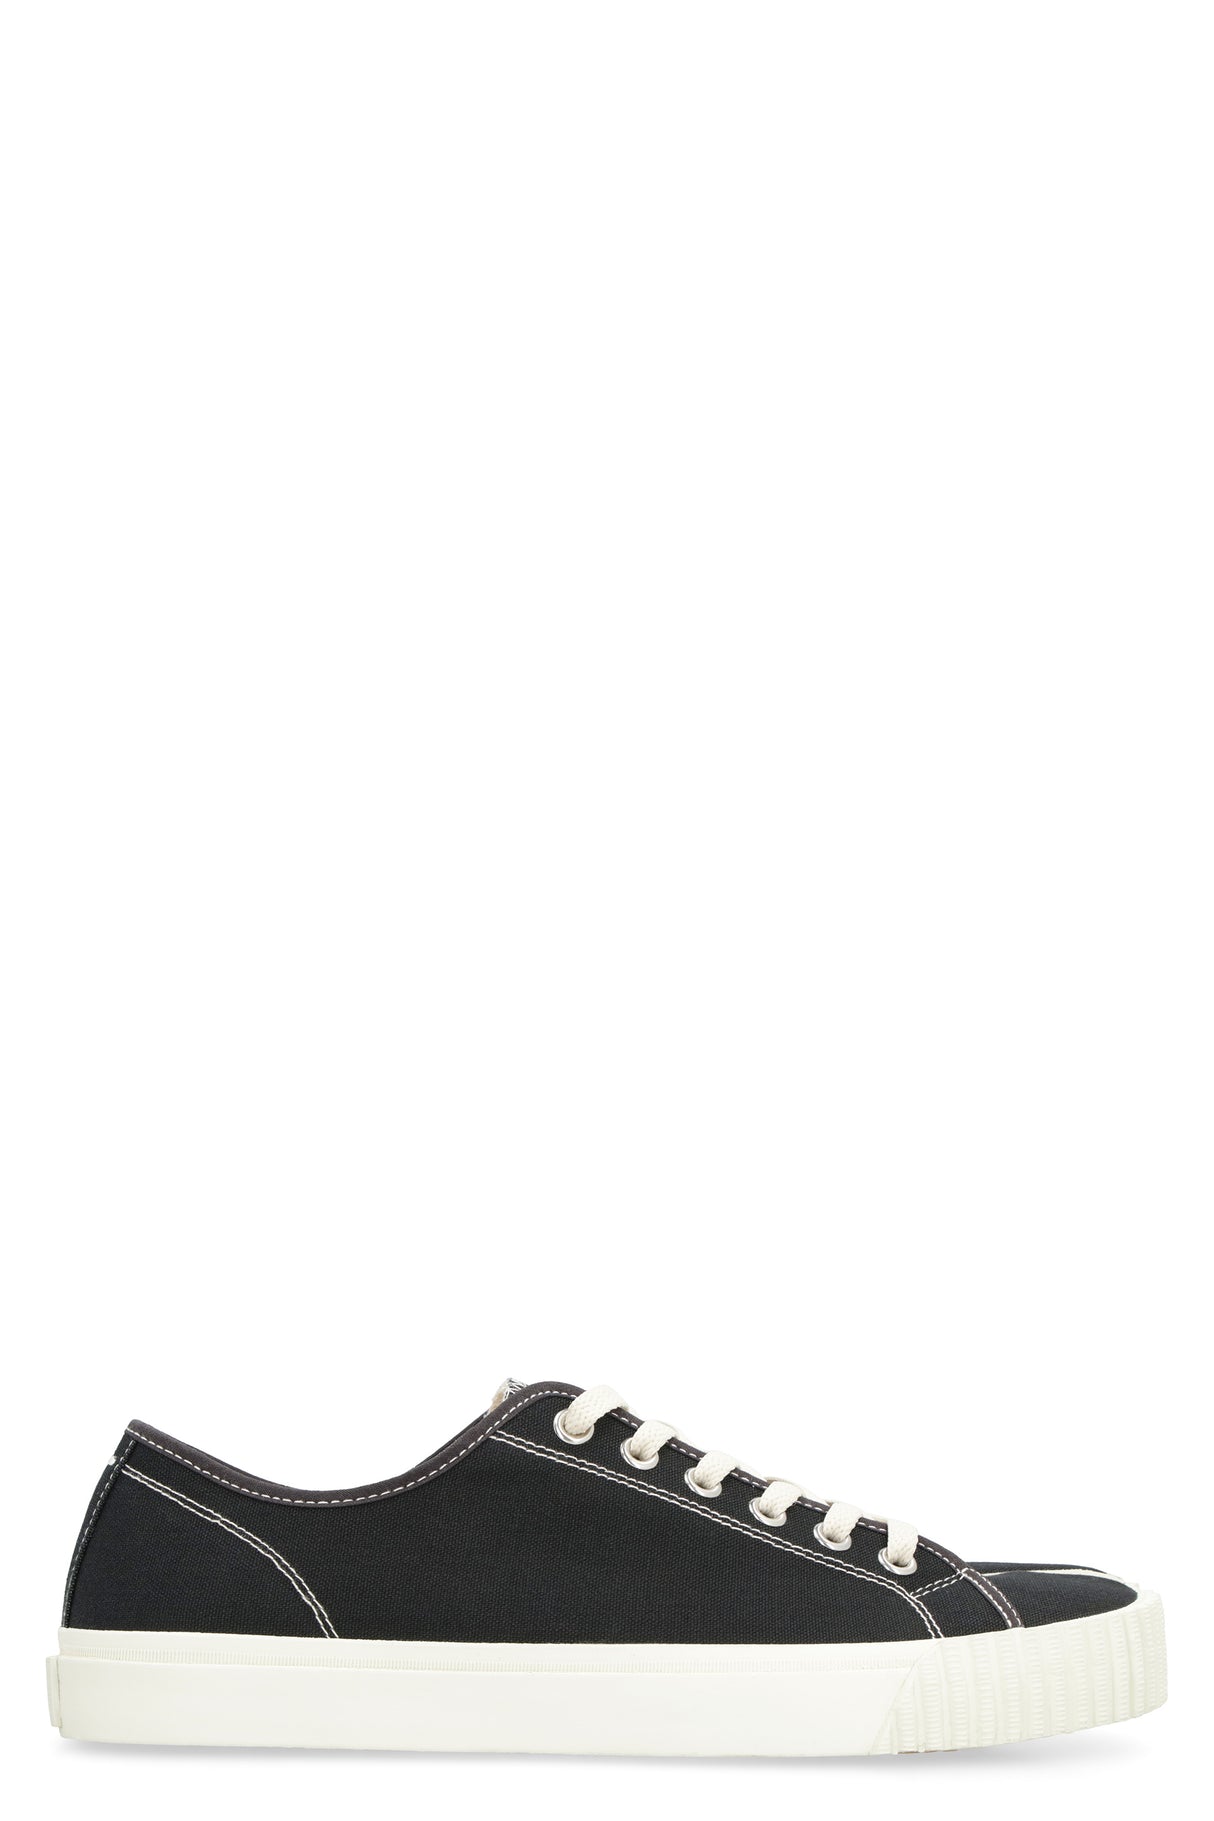 MAISON MARGIELA Black Canvas Sneakers for Men with Iconic Tabi Cleft Toe